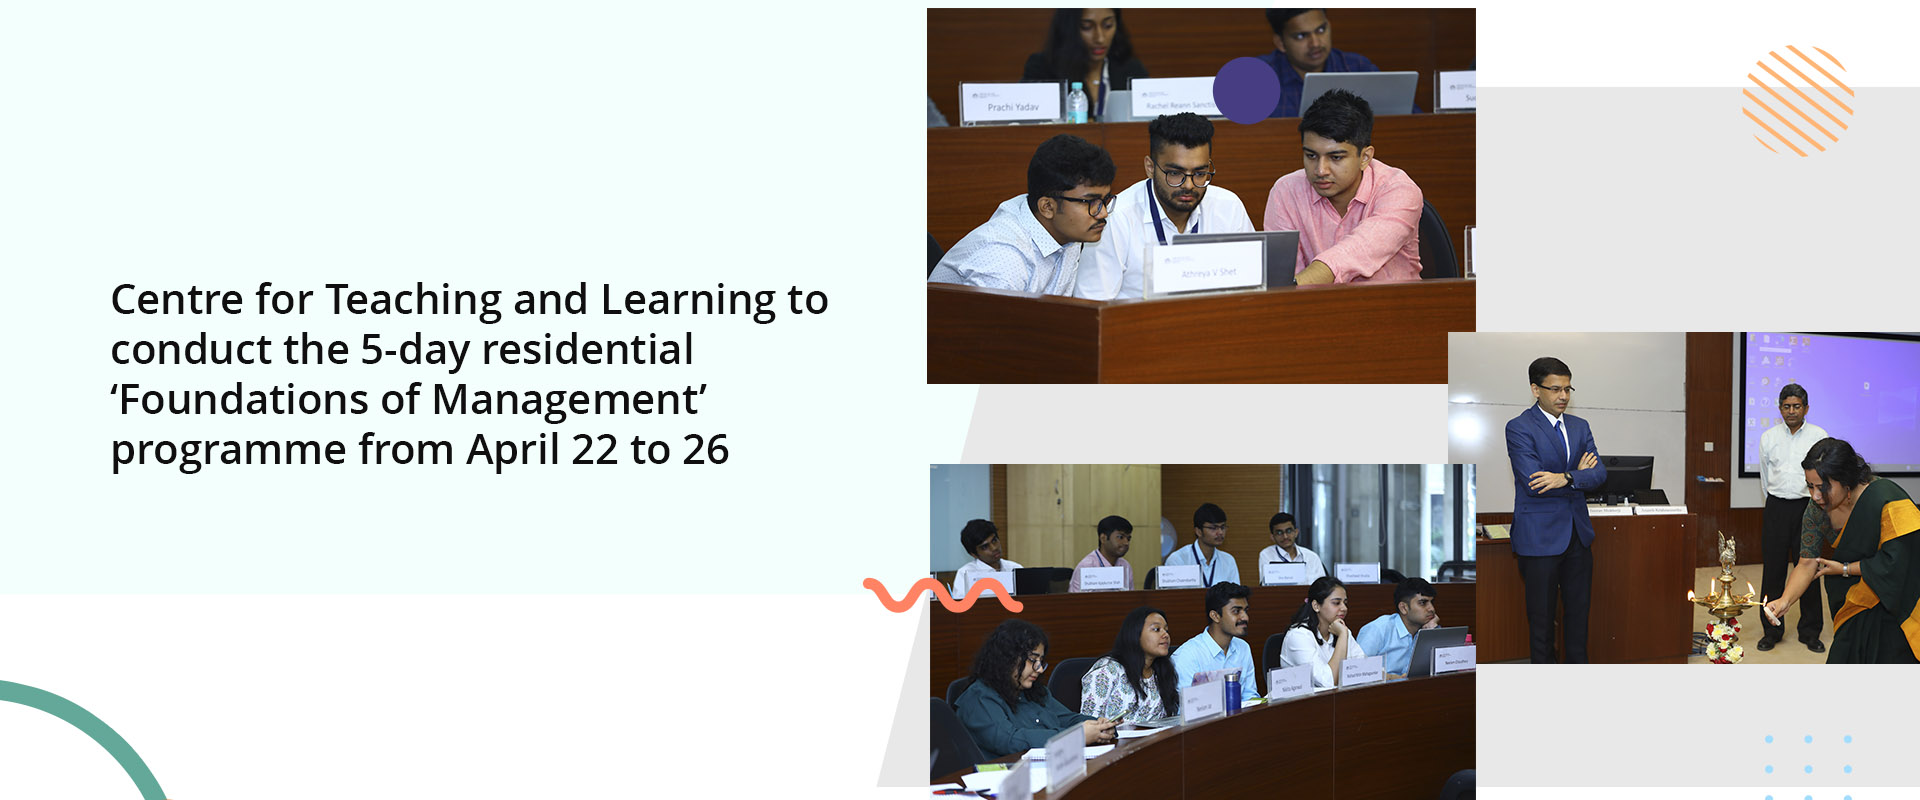 Centre for Teaching and Learning to conduct the 5-day residential ‘Foundations of Management’ programme from April 22 to 26 